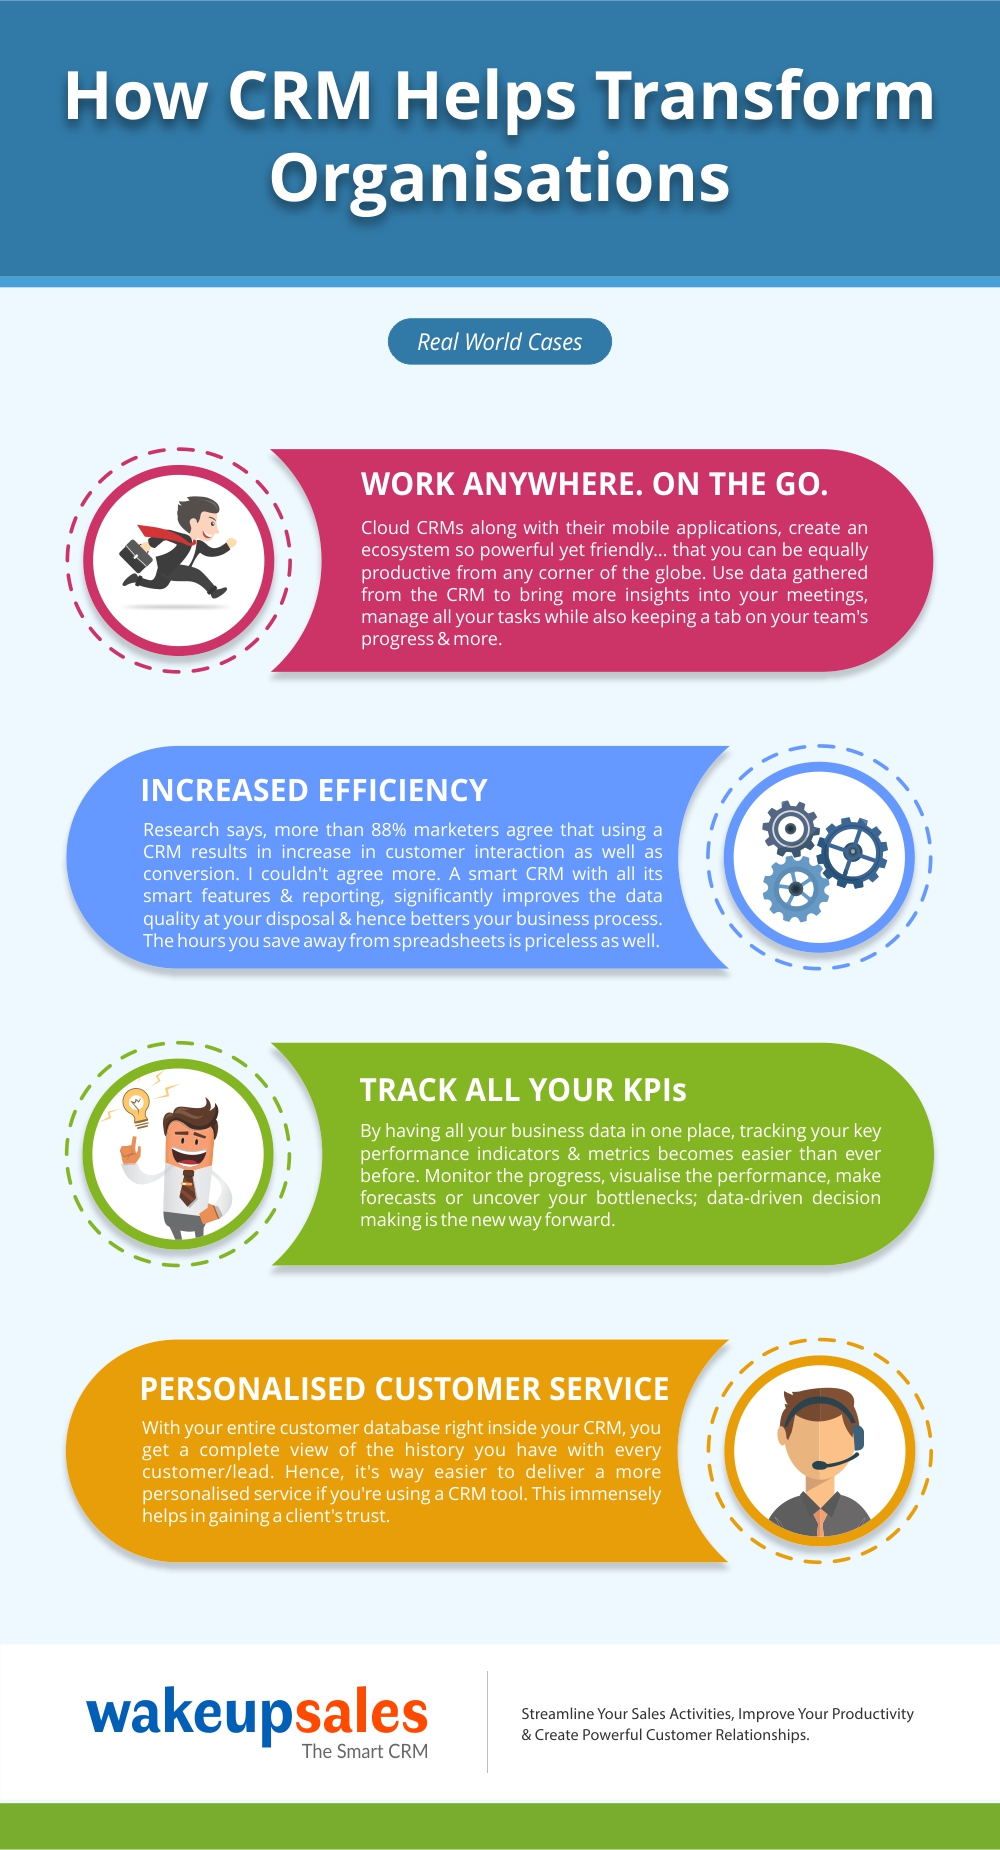 How CRM Helps Transform Organisations v4The Ways CRM Can Helps To Transform Your Business